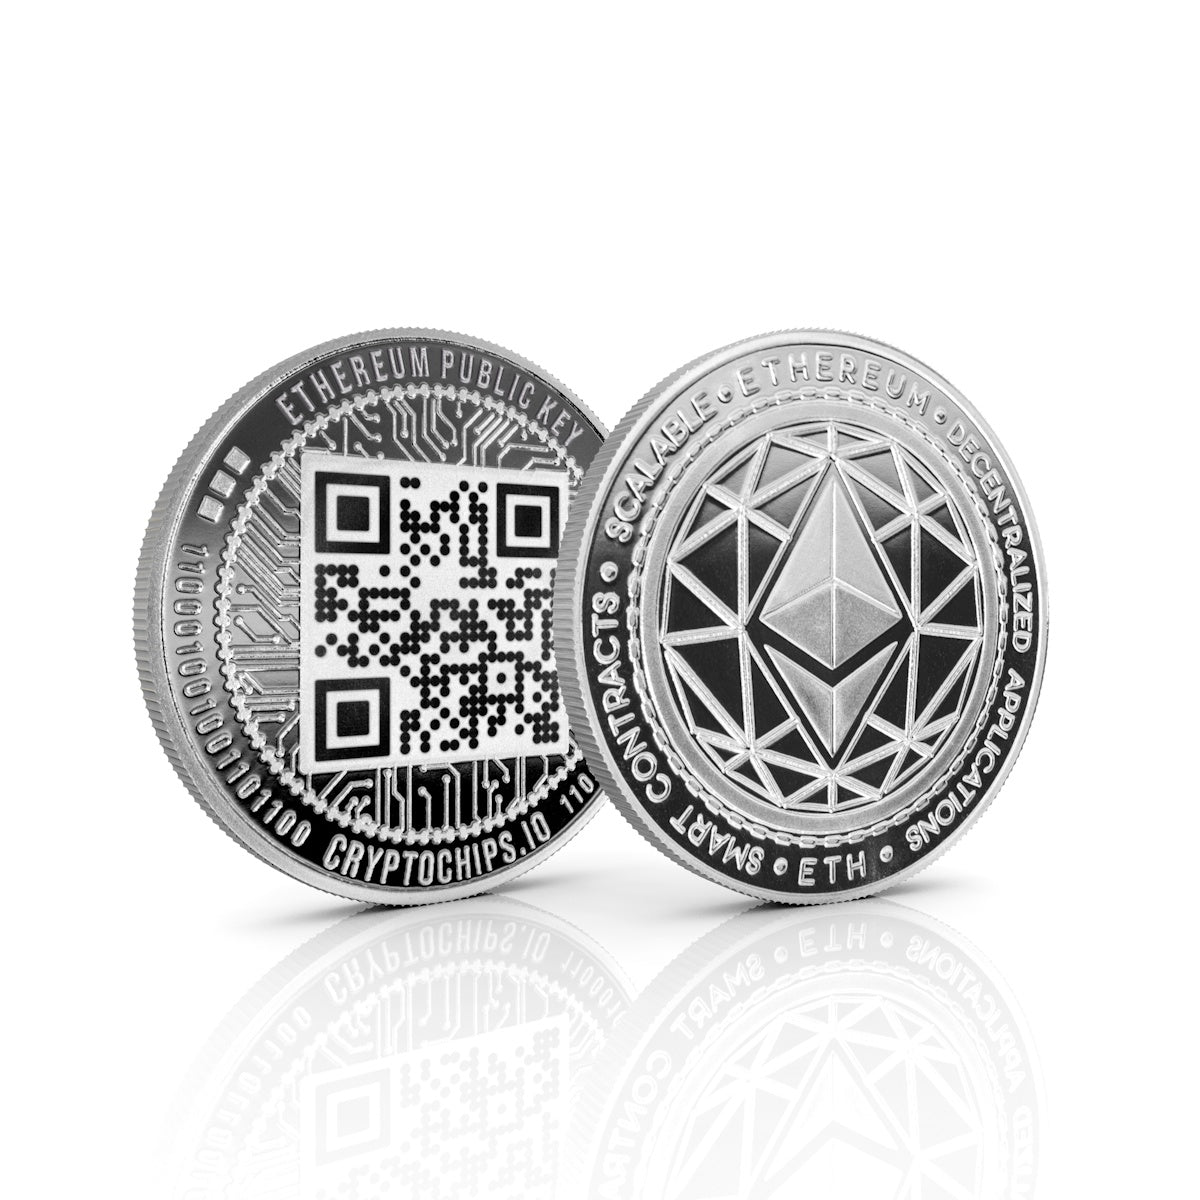 Cryptochips | Ethereum QR Coin Physical Crypto Coin. Collectable cryptocurrency merch you can hodl